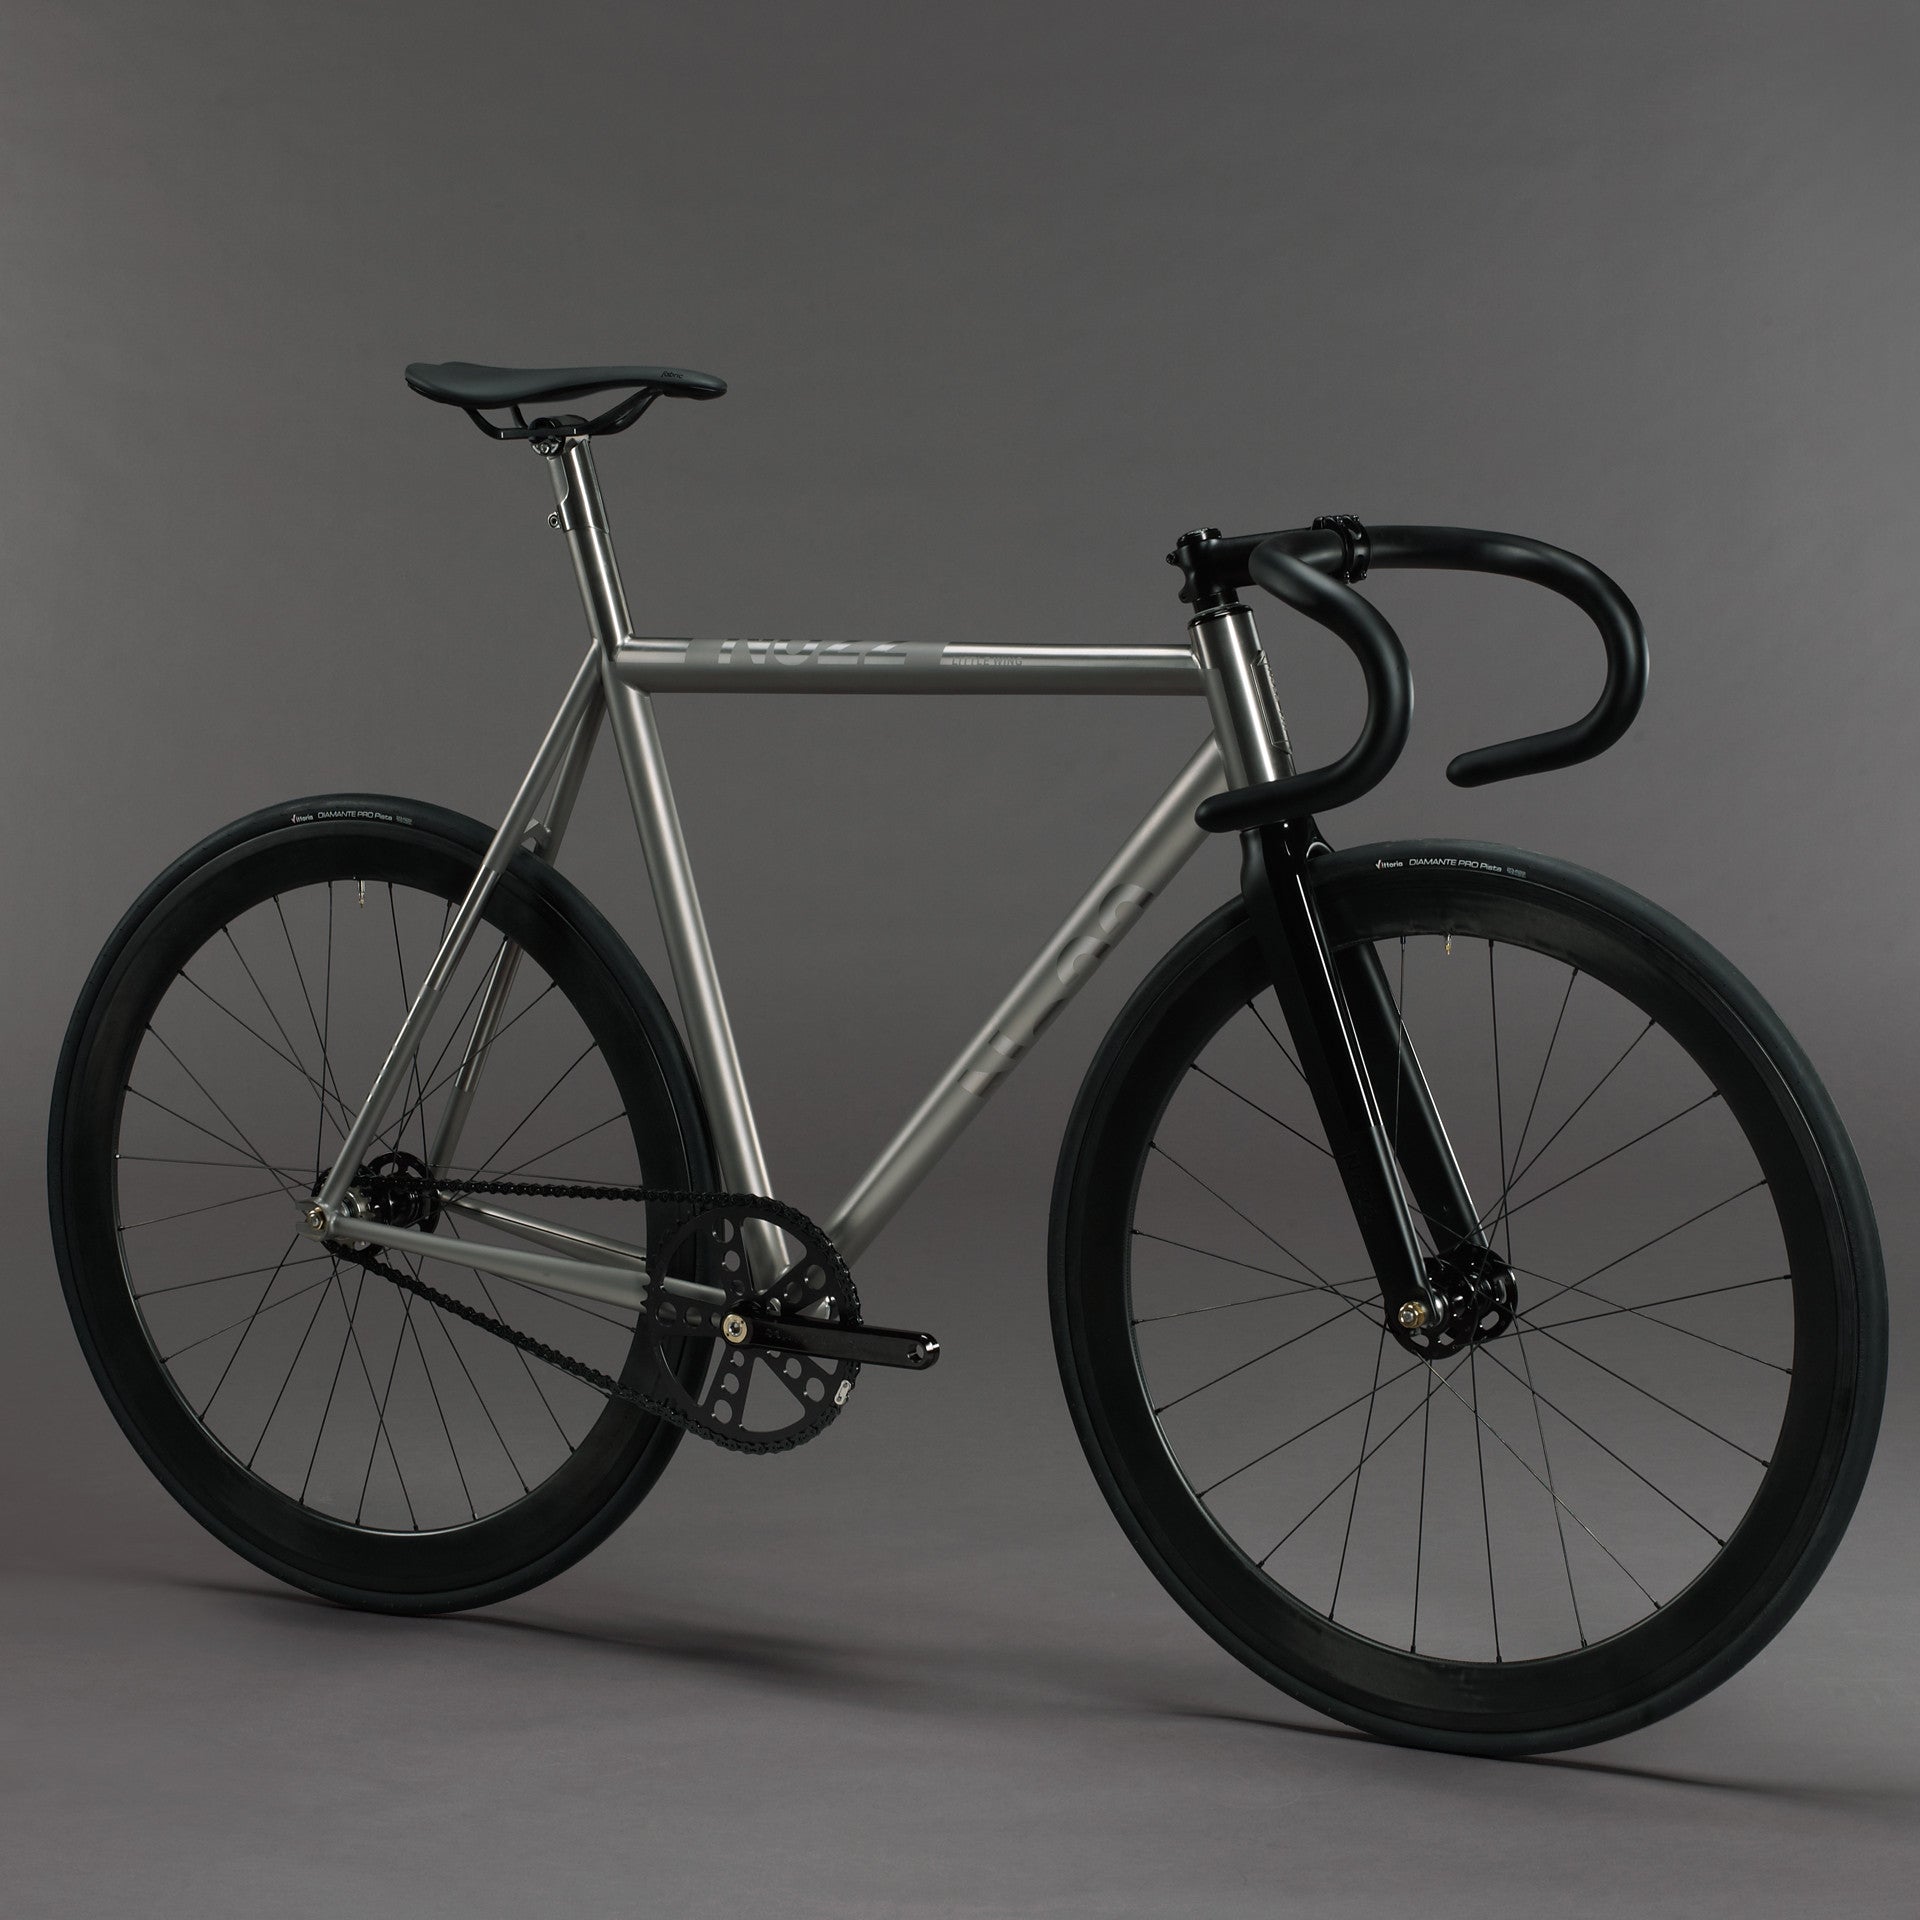 Our Bikes – No. 22 Bicycle Company